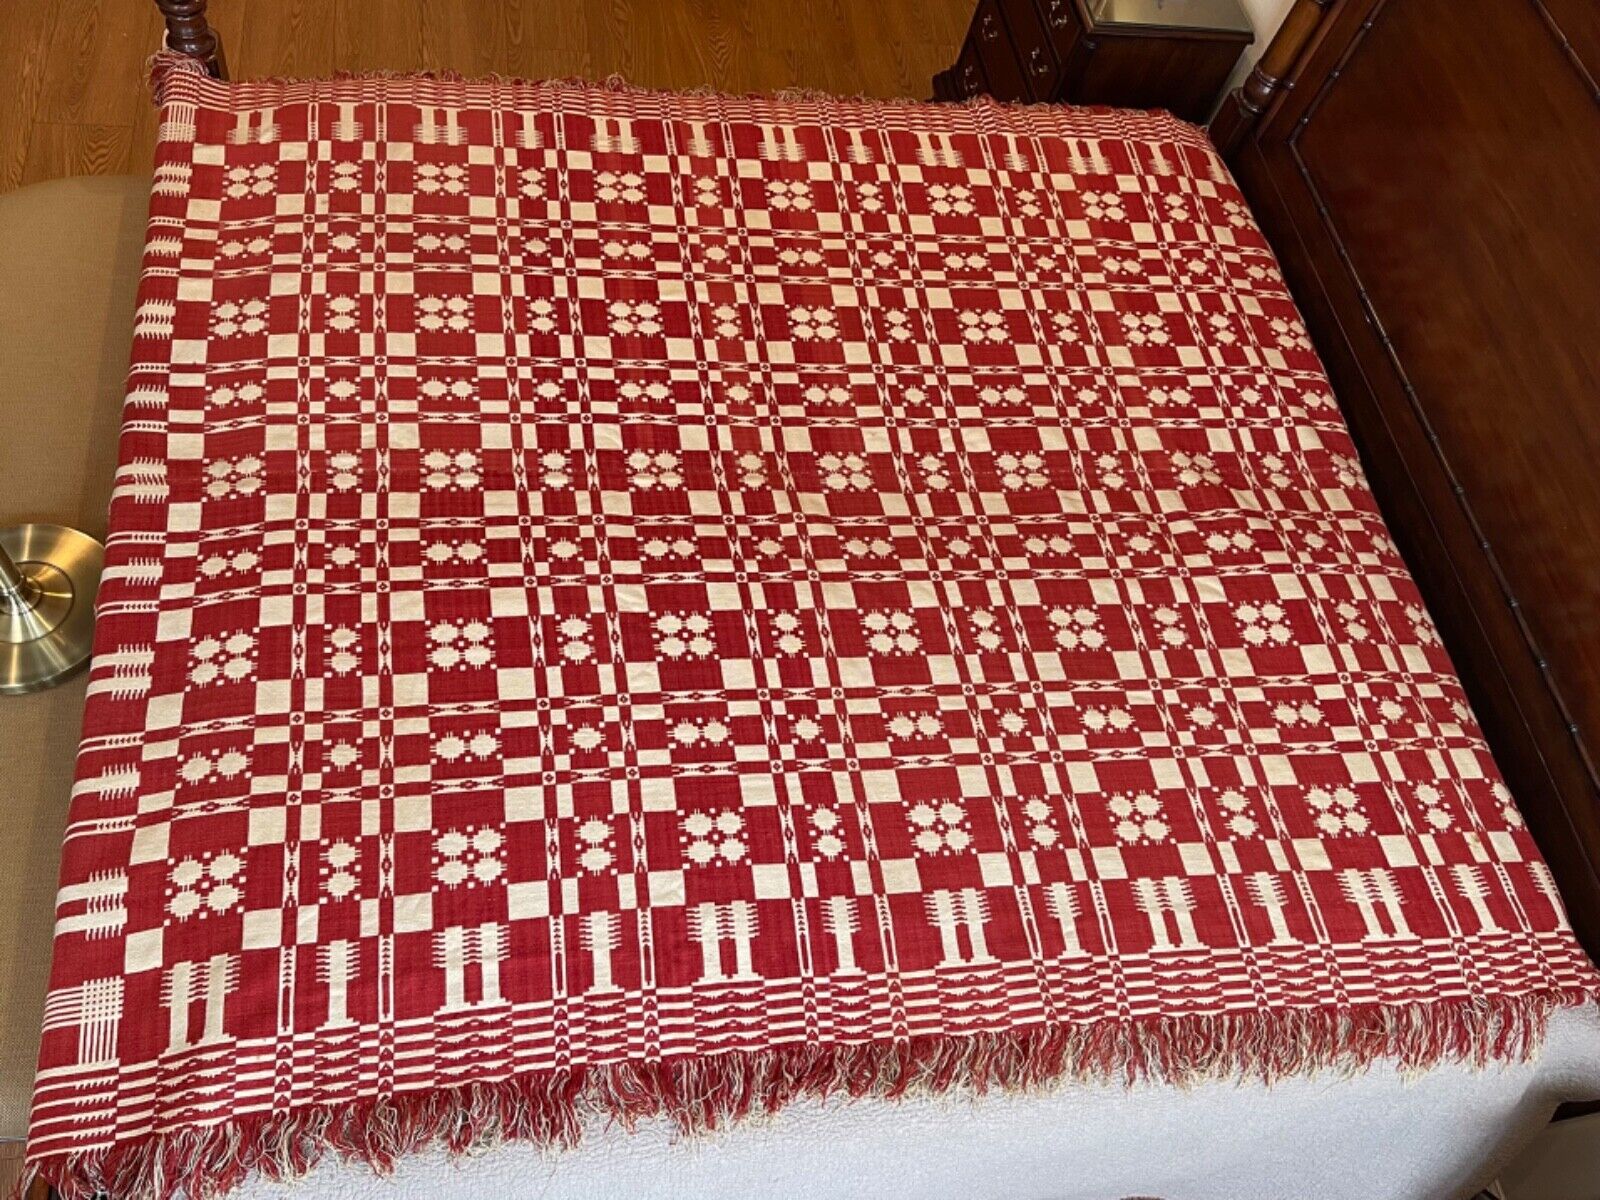 Antique Double Woven Red & White Snowball and Pine Tree Variation Coverlet